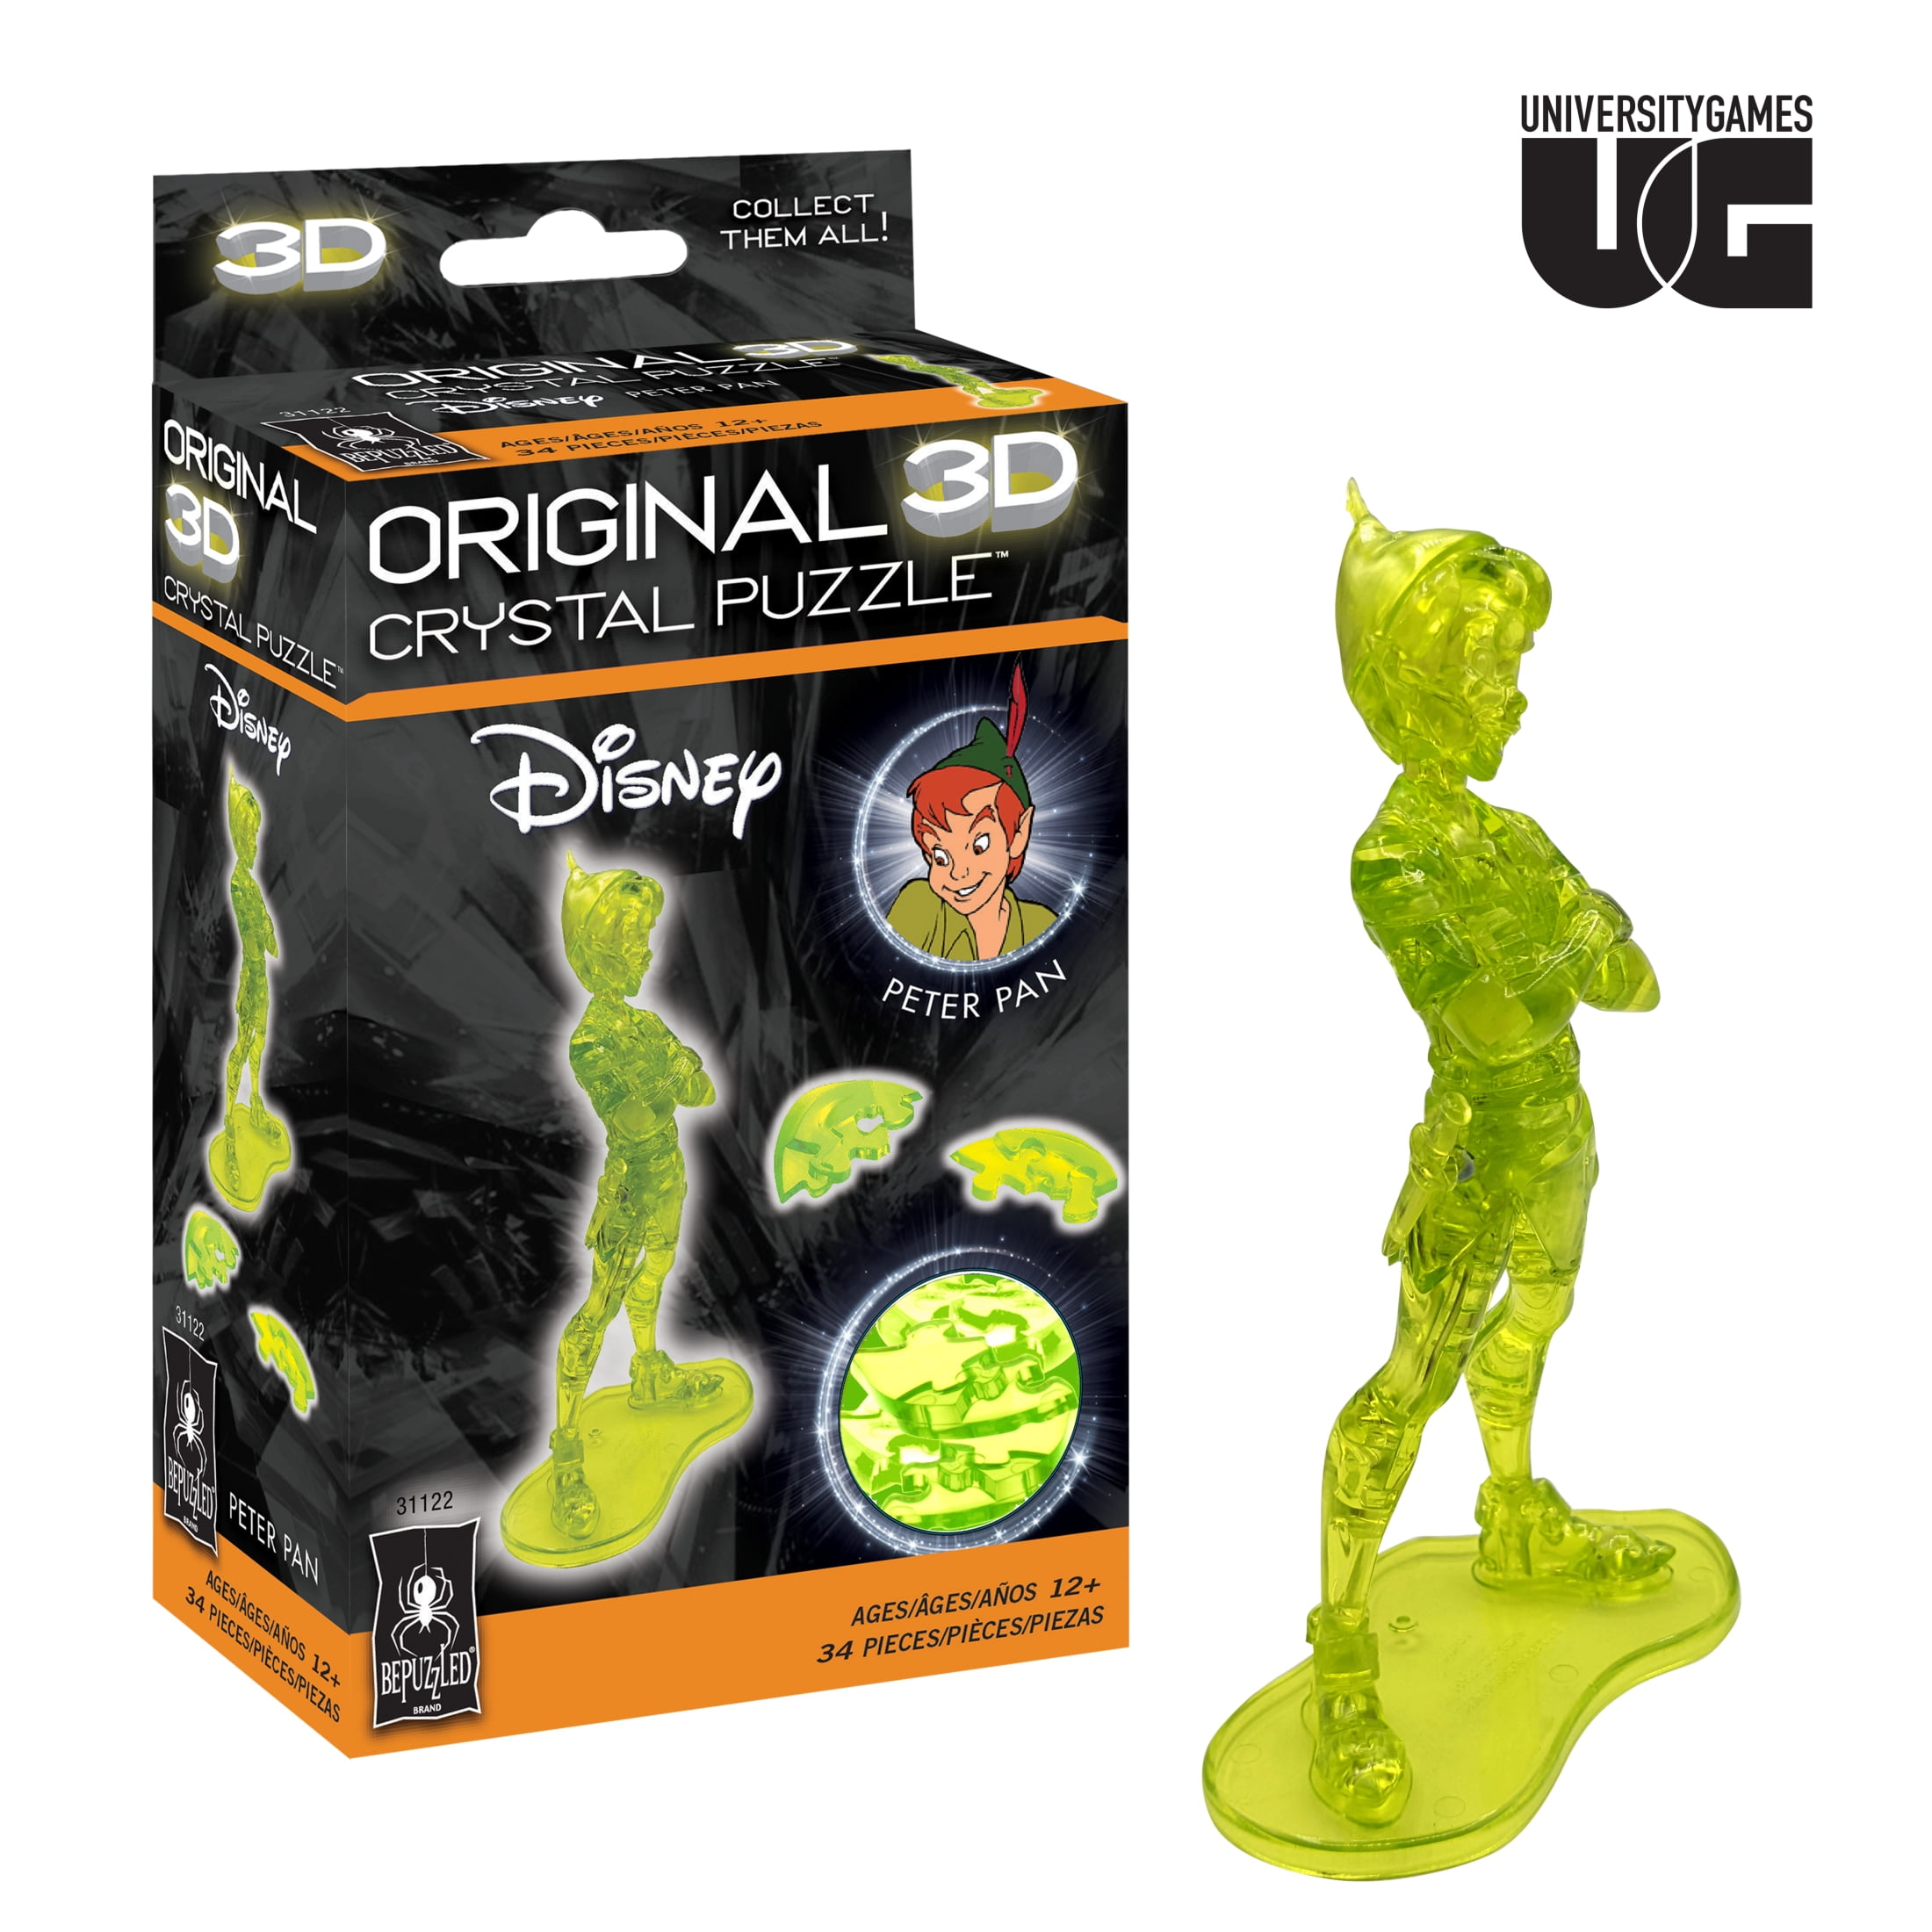 Disney Peter Pan Original 3D Crystal Puzzle from BePuzzled, Ages 12 and Up